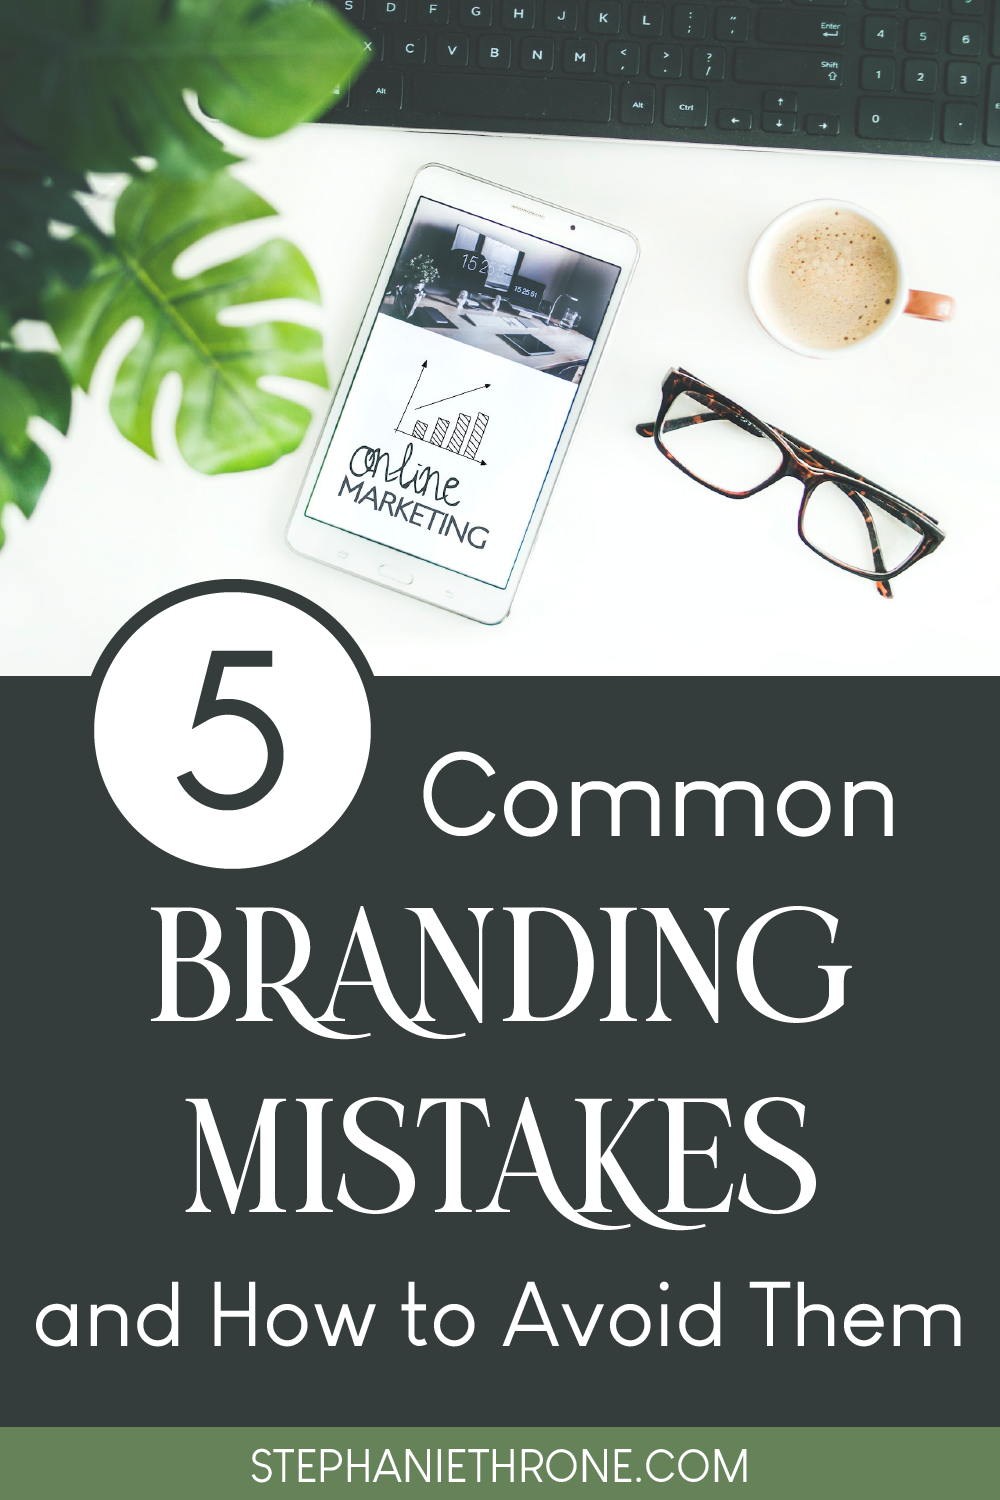 5 Common Branding Mistakes and How to Avoid Them